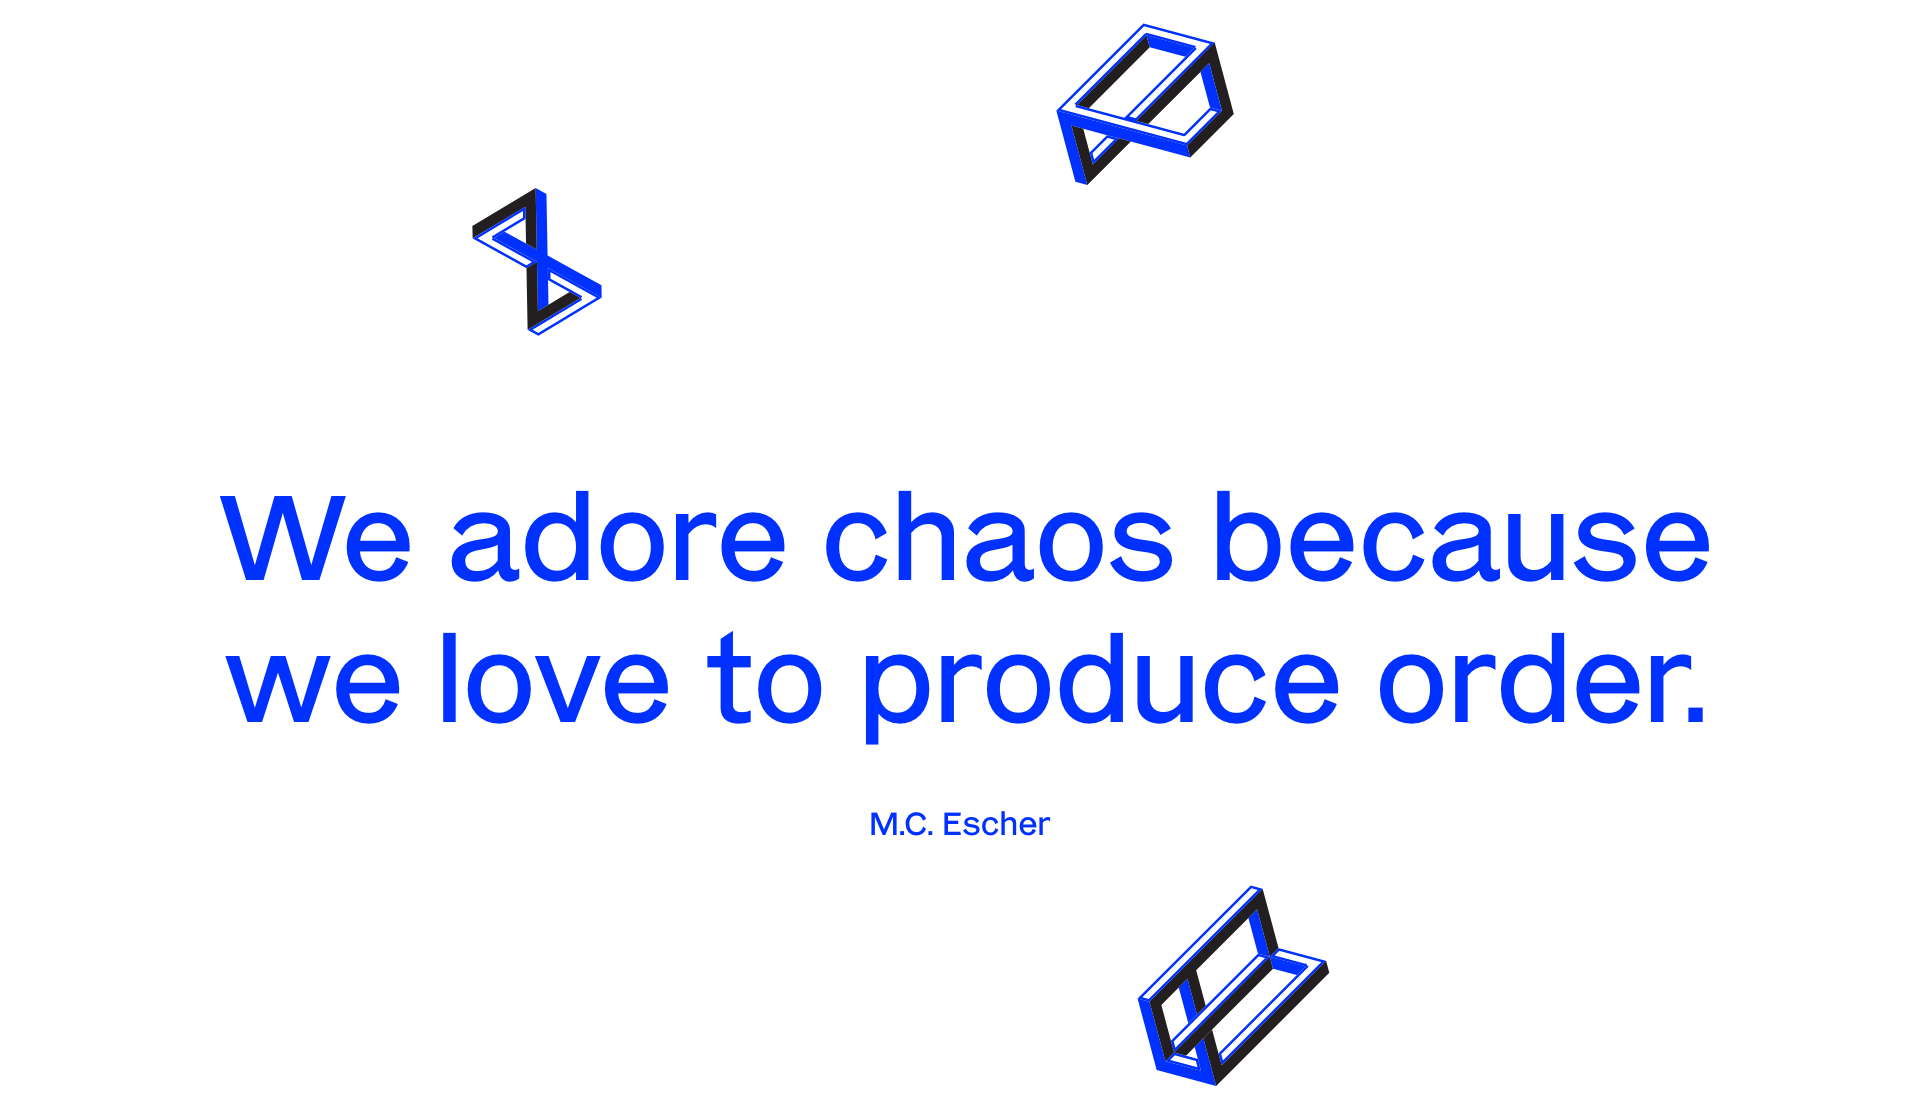 We adore chaos because we love to produce order. M.C. Escher